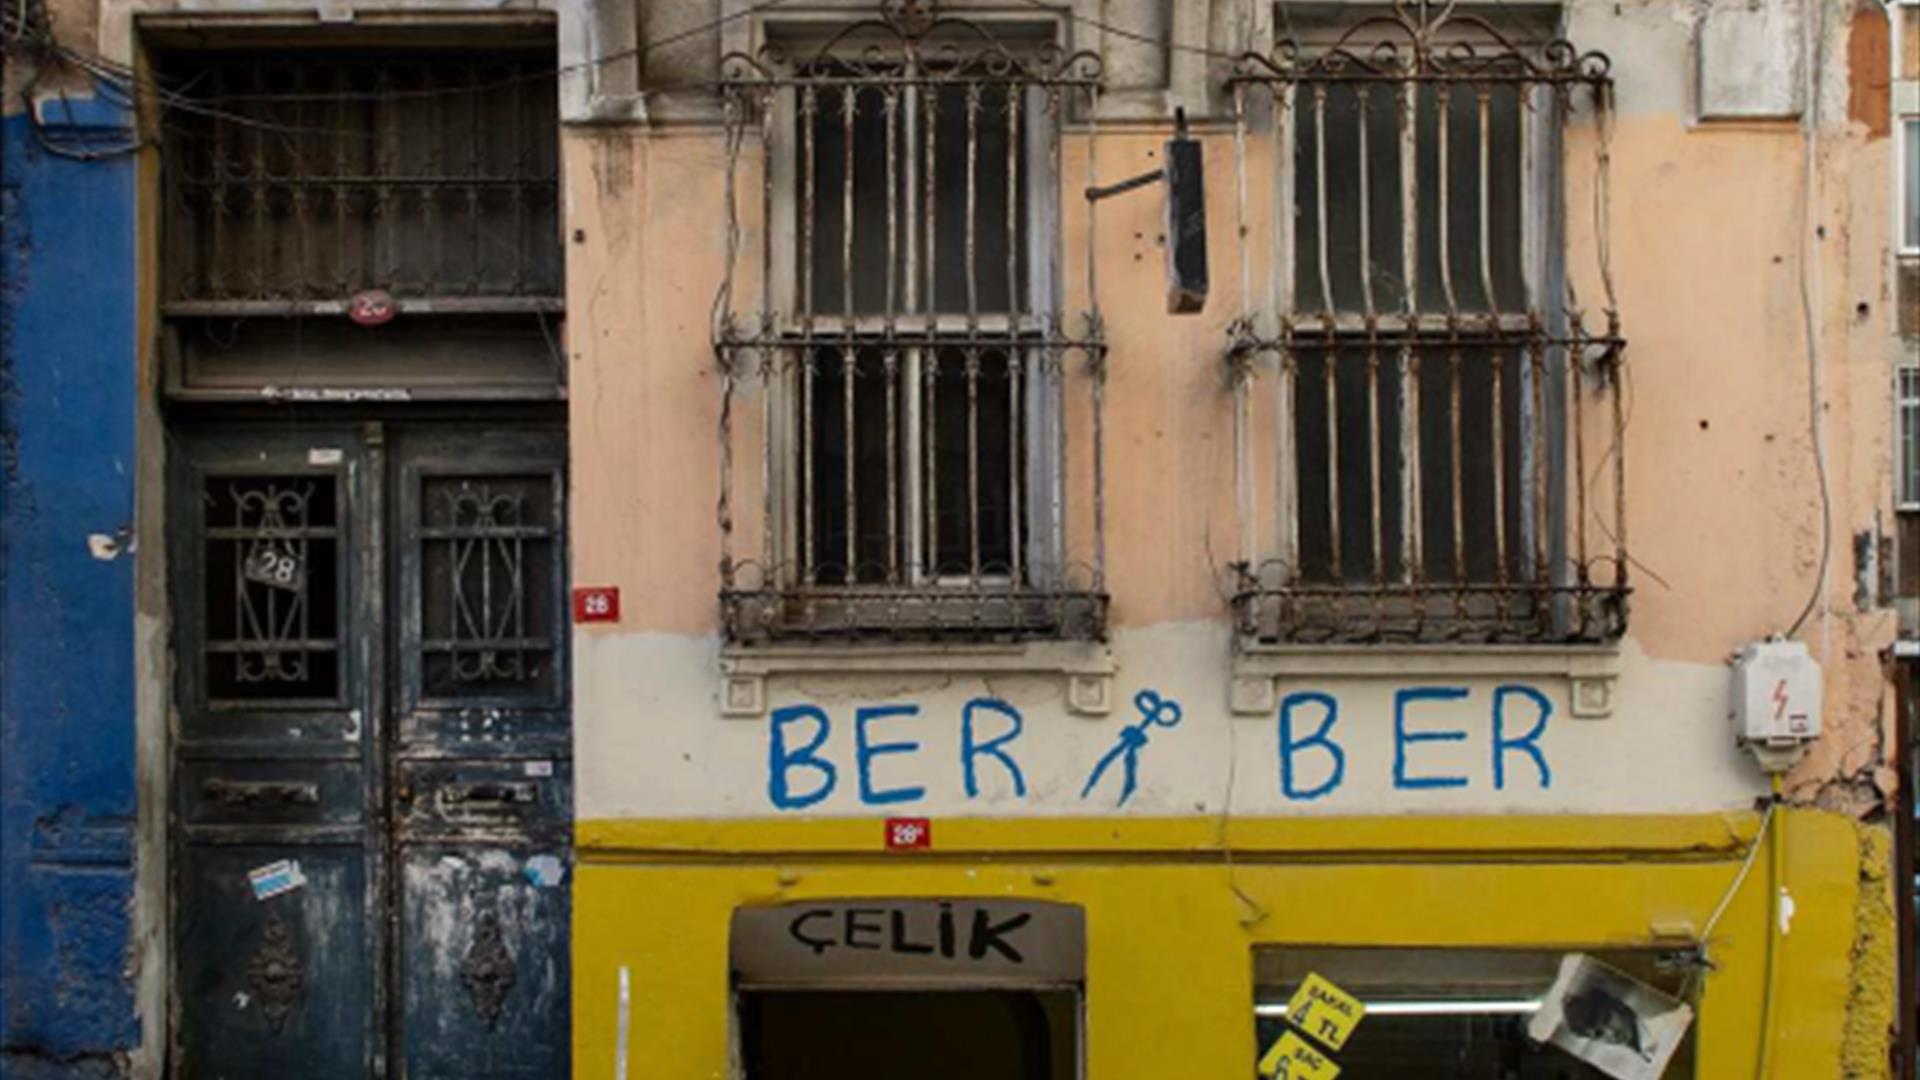 A rundown looking building housing a barber shop with graffiti saying 'Ber Ber' and a pair of scissors